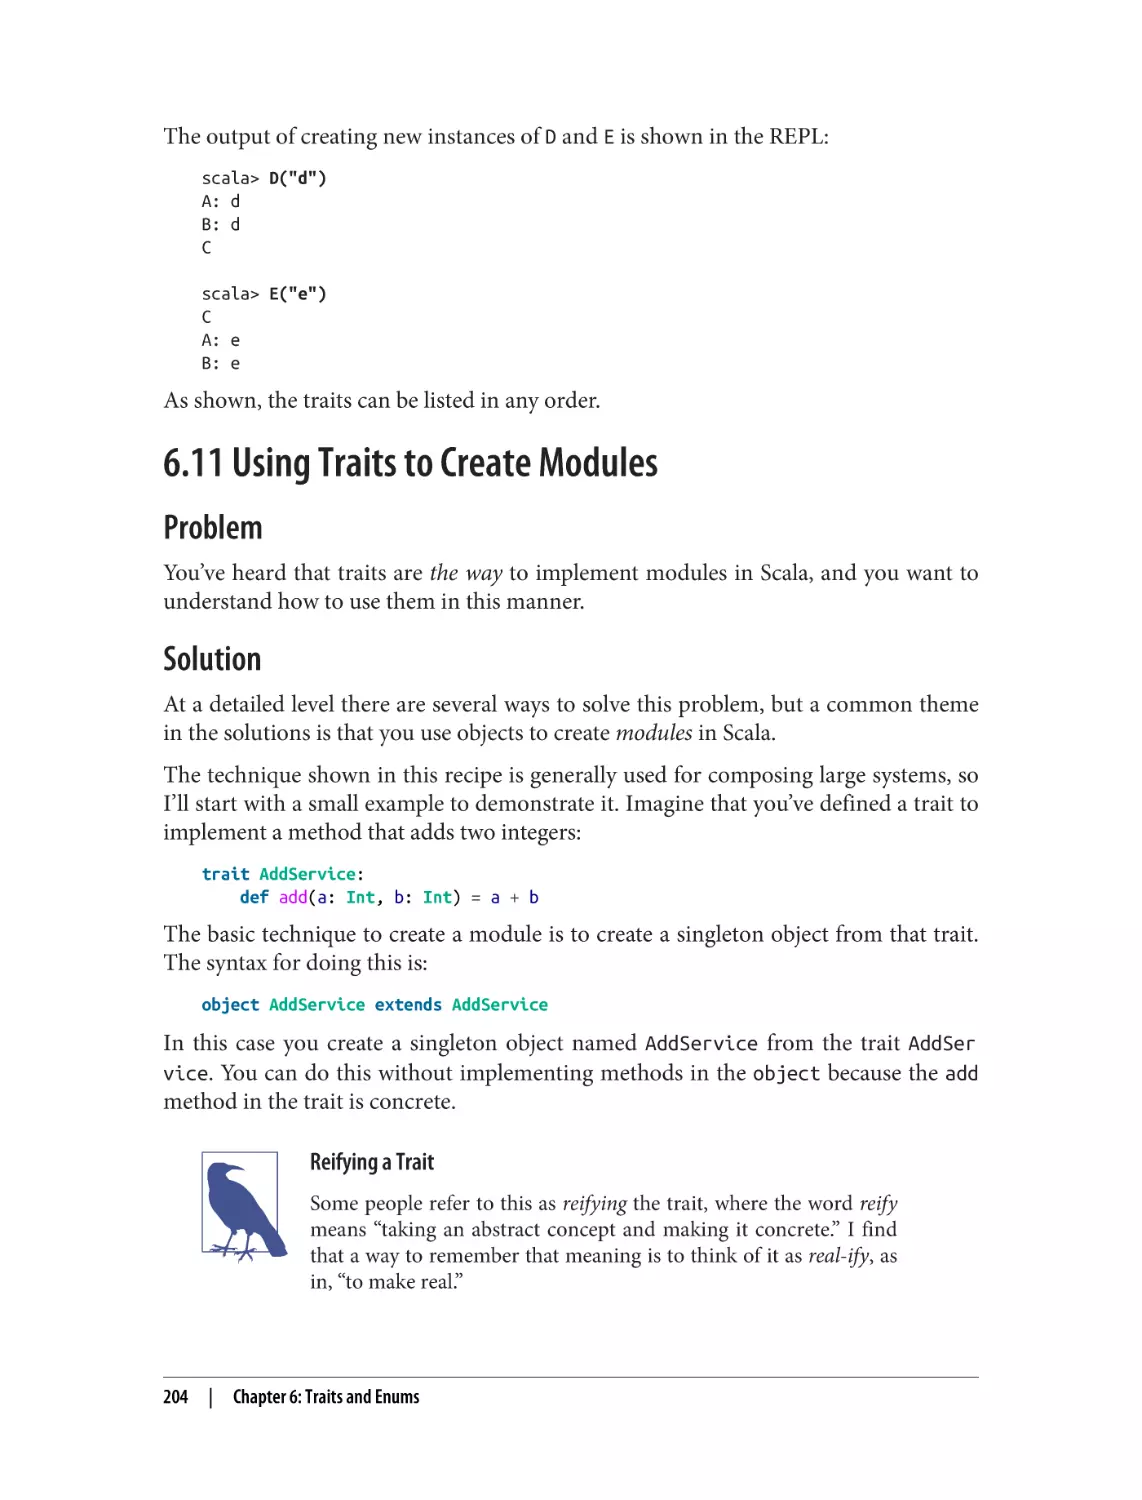 6.11 Using Traits to Create Modules
Problem
Solution